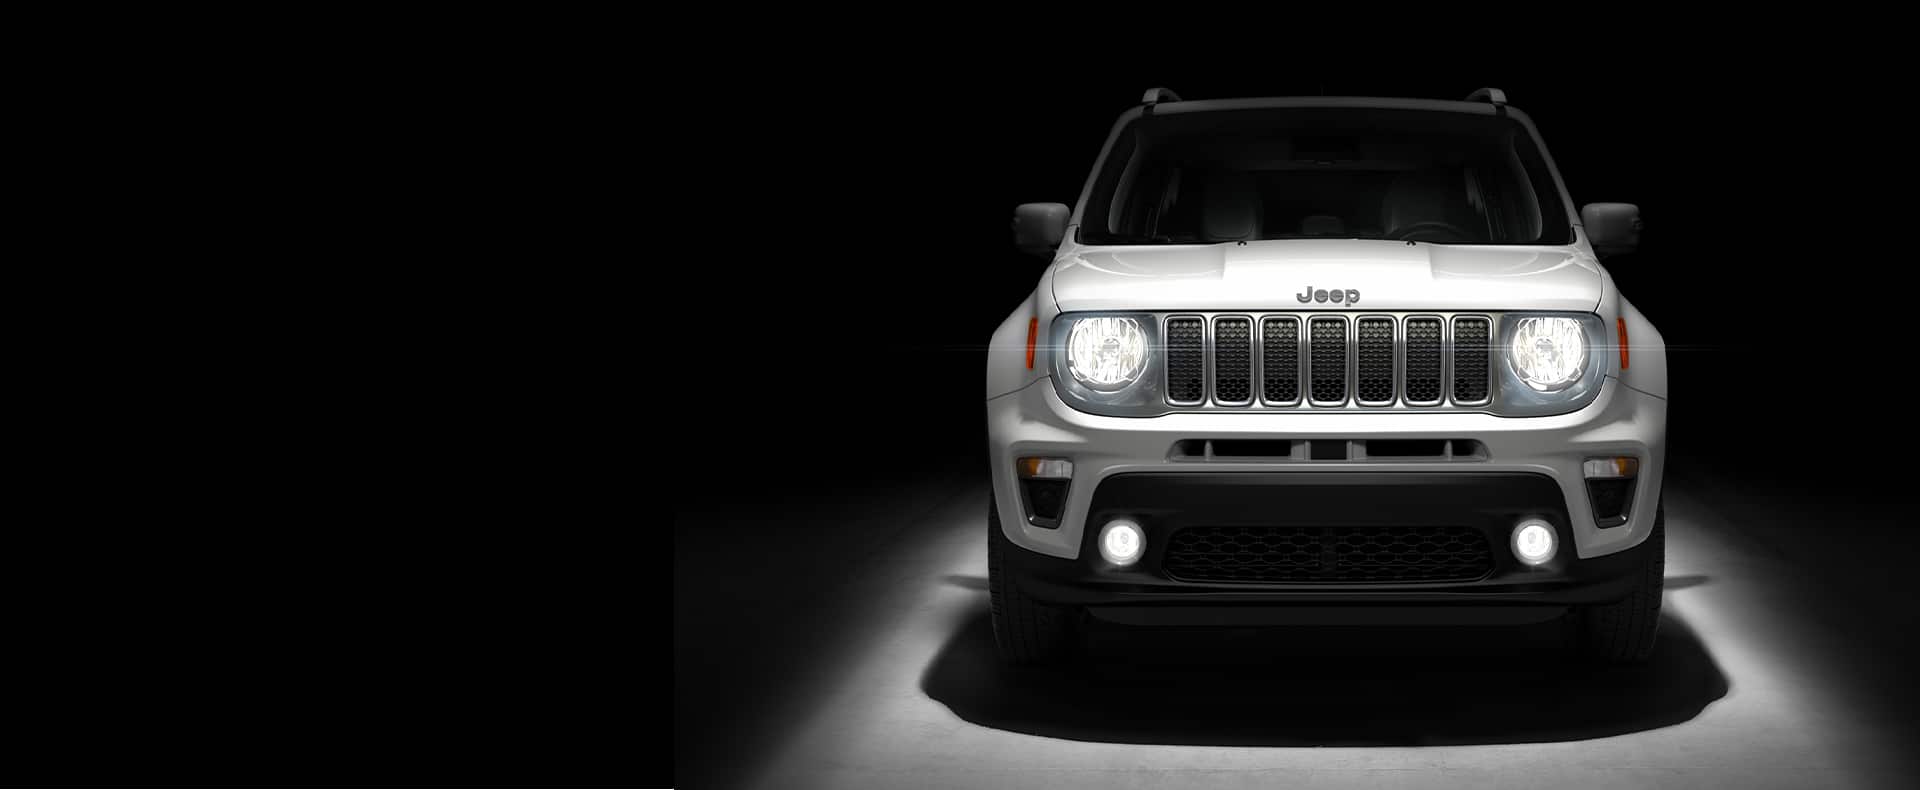 Head-on view of 2021 Jeep Renegade with its headlamps and fog lamps illuminated.